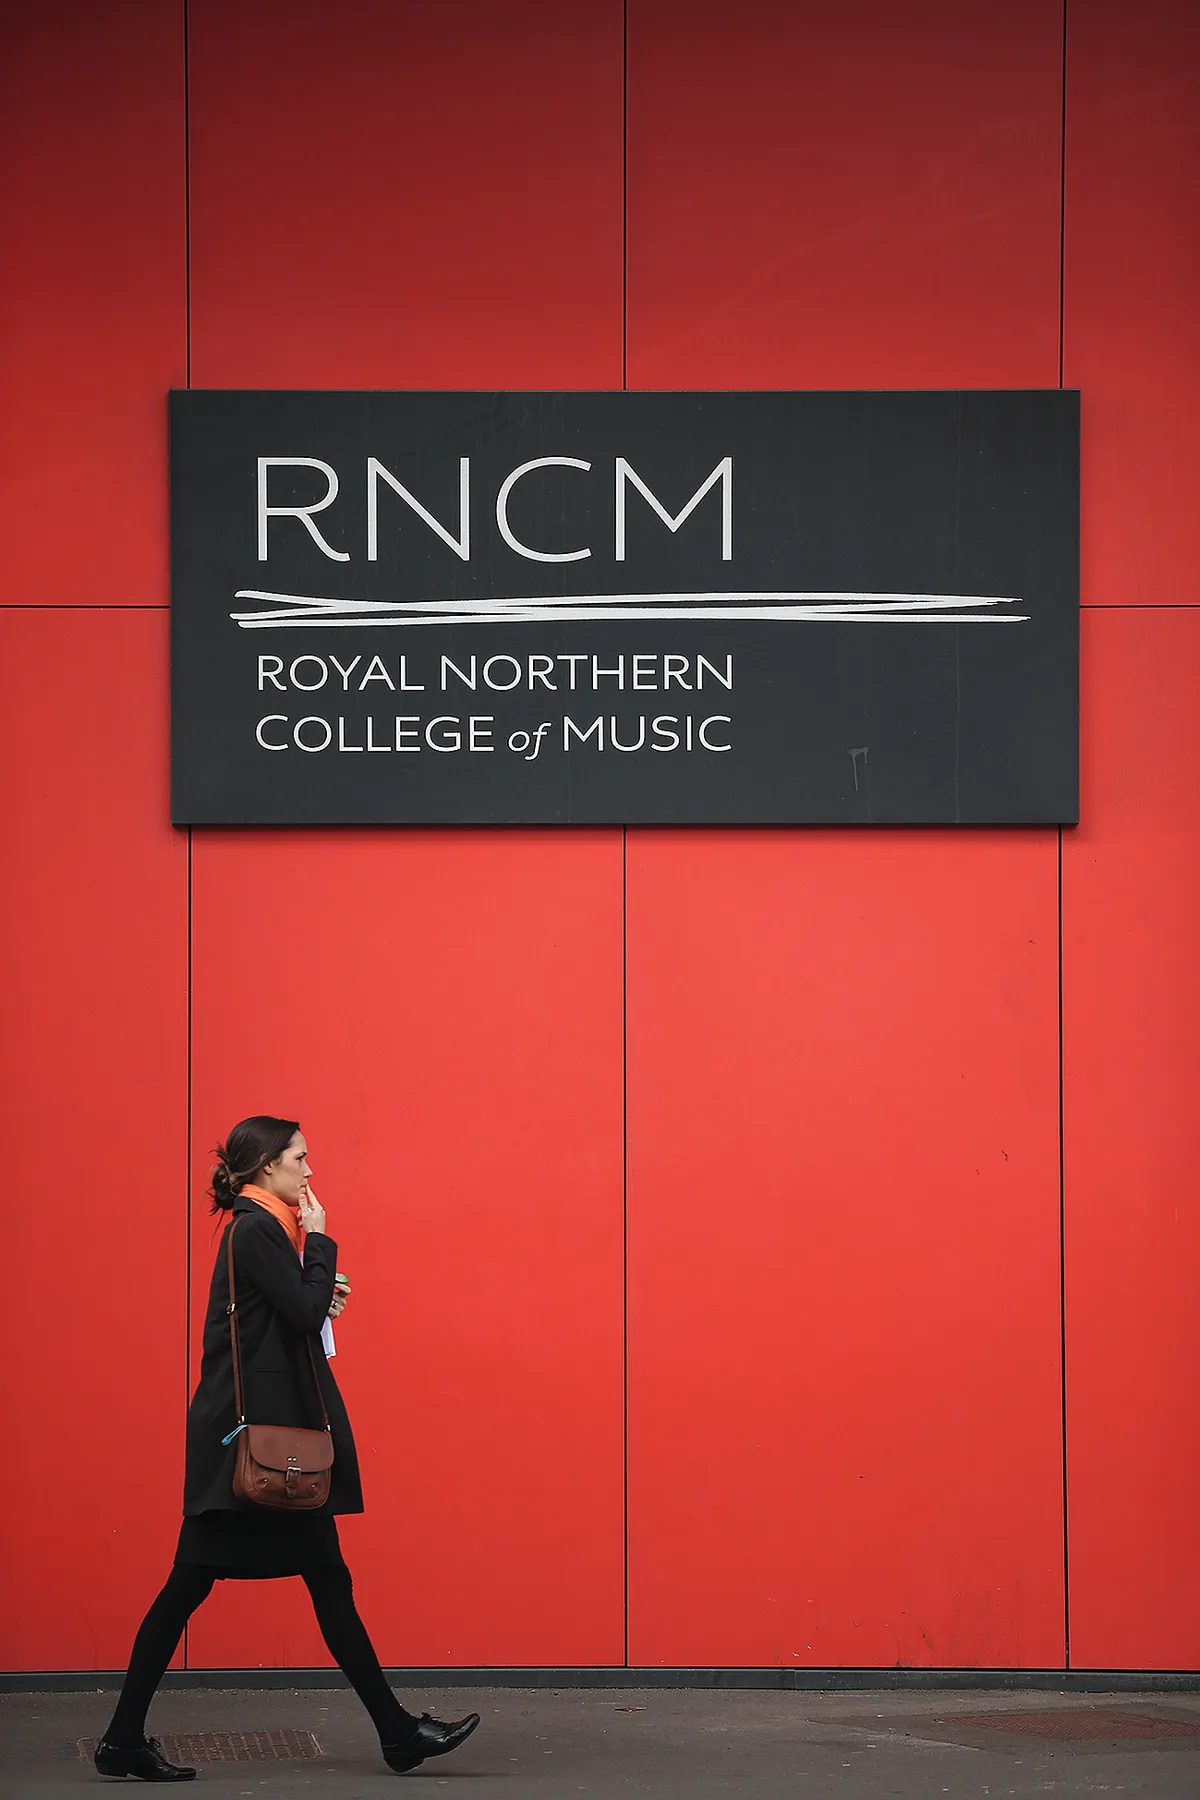 MANCHESTER, ENGLAND - MARCH 04: A general view of the Royal Northern College of Music on March 4, 2013 in Manchester, England. Ten former teachers of Chetham's School of Music are under investigation as part of a probe into historic sex abuse by Greater Manchester Police, with some having also worked at the Royal Northern College of Music. (Photo by Christopher Furlong/Getty Images)